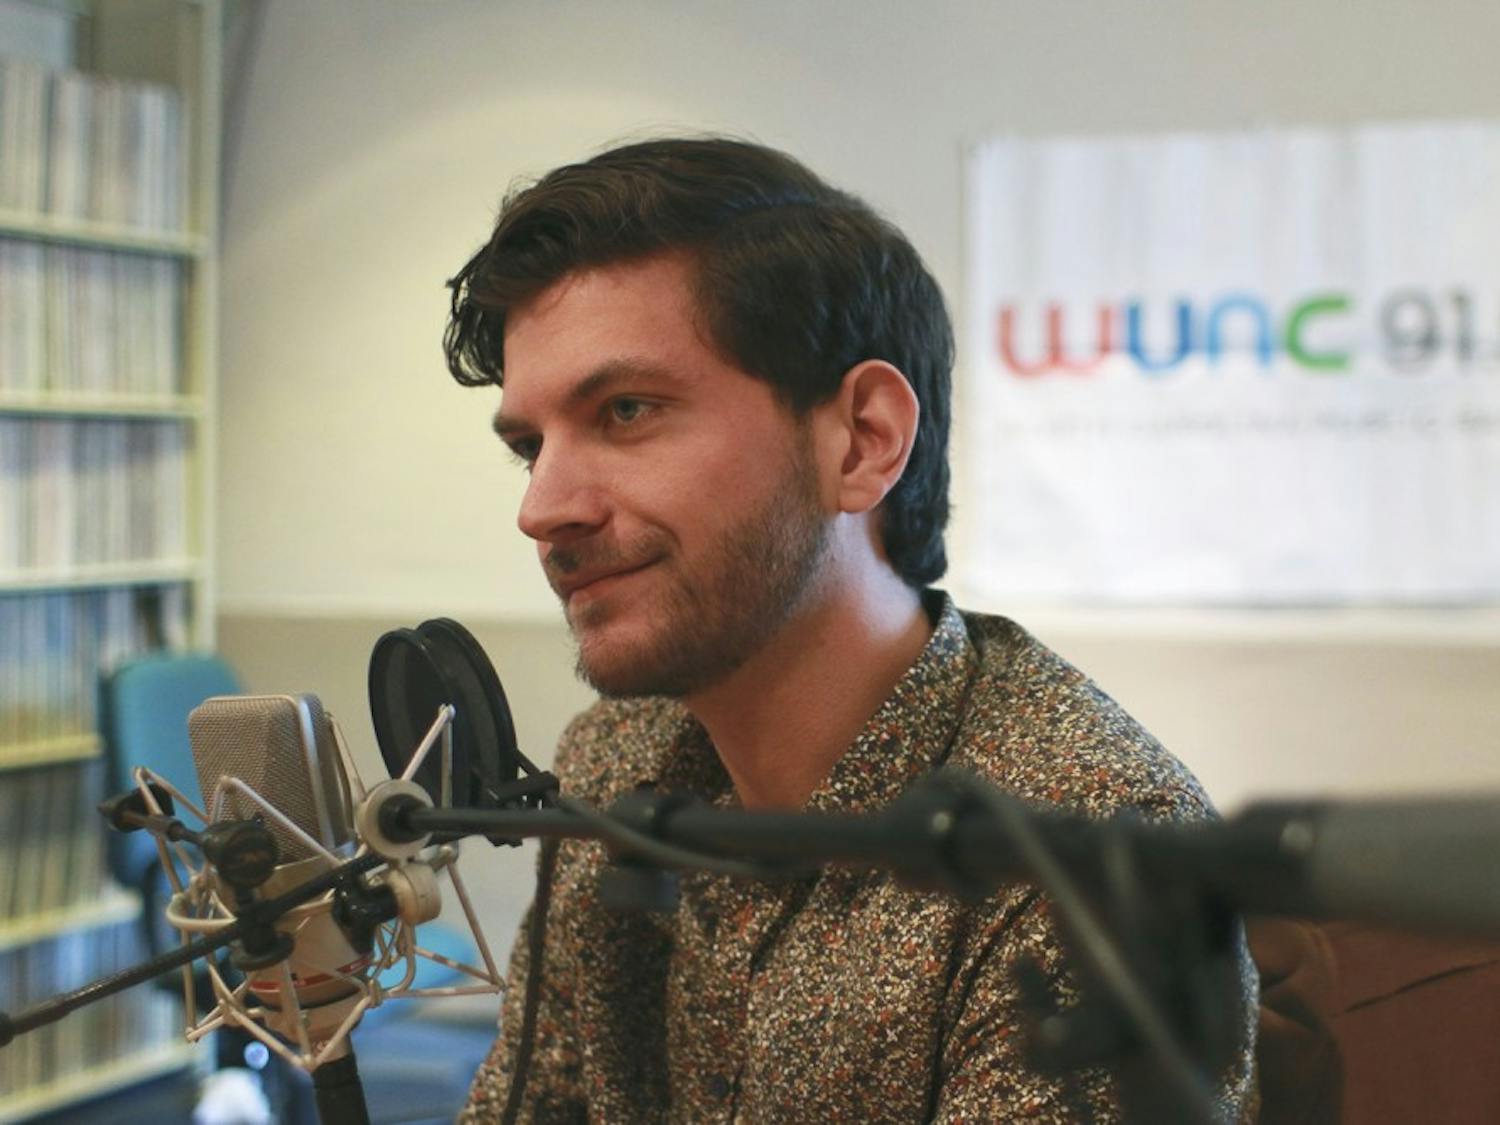 Will McInerney recorded a new podcast with Mohammed Moussa (not pictured) at WUNC Studios in Chapel Hill on Friday. The podcast will cover issues such as social justice and cultural inequality and is part of a series called Stories With a Heartbeat that is set to be released this spring.